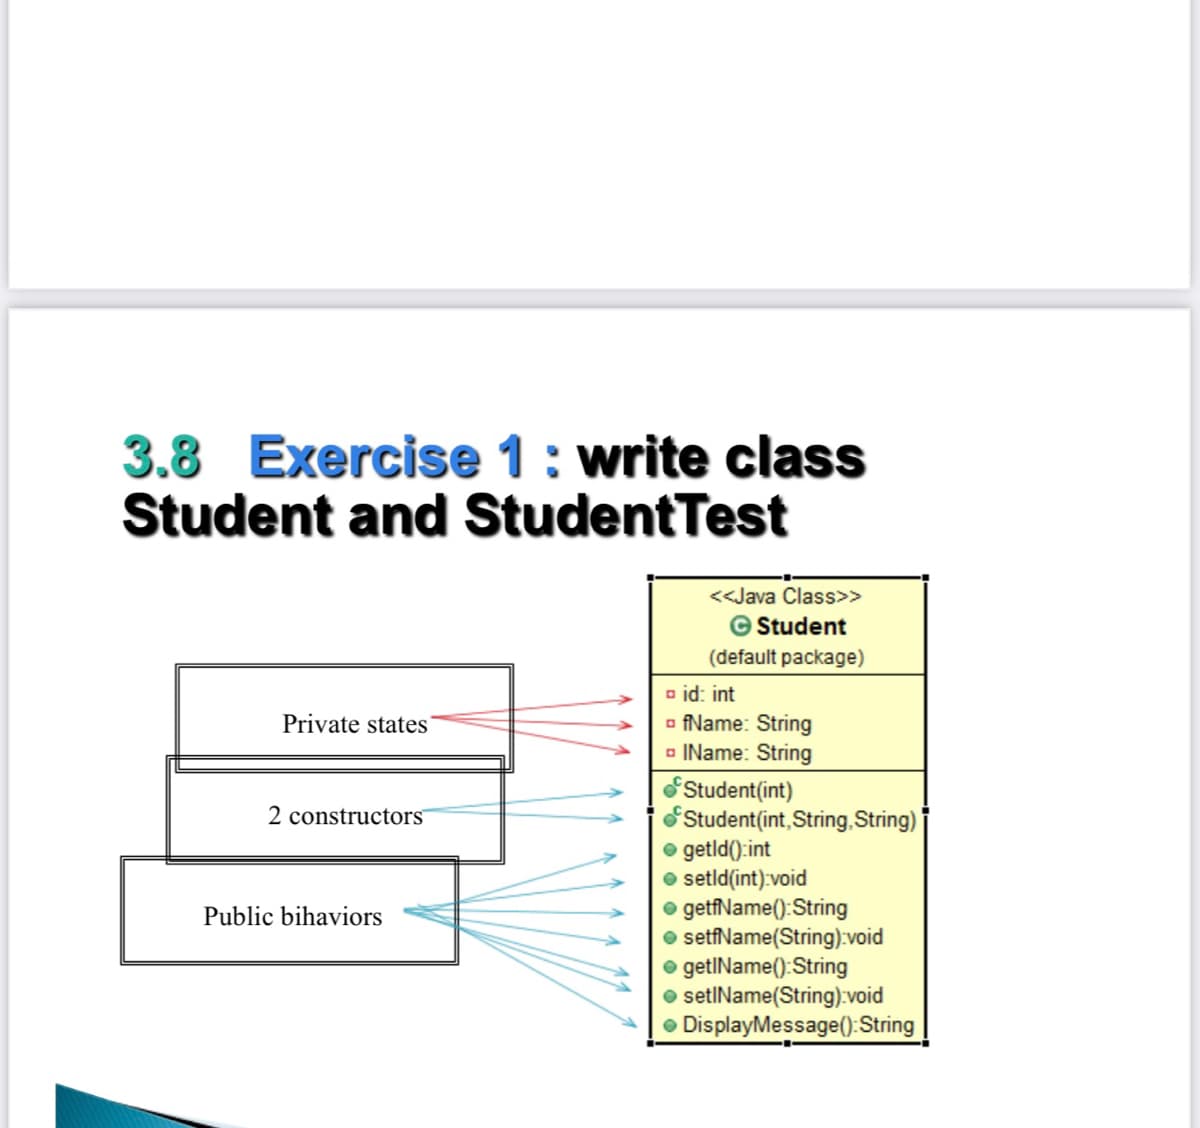 3.8 Exercise 1: write class
Student and StudentTest
<<Java Class>>
© Student
(default package)
o id: int
o fName: String
a IName: String
Private states
'Student(int)
Student(int, String, String)
o getld():int
o setld(int):void
• getfName():String
o setfName(String):void
• getIName():String
o setIName(String):void
• DisplayMessage():String
2 constructors
Public bihaviors
